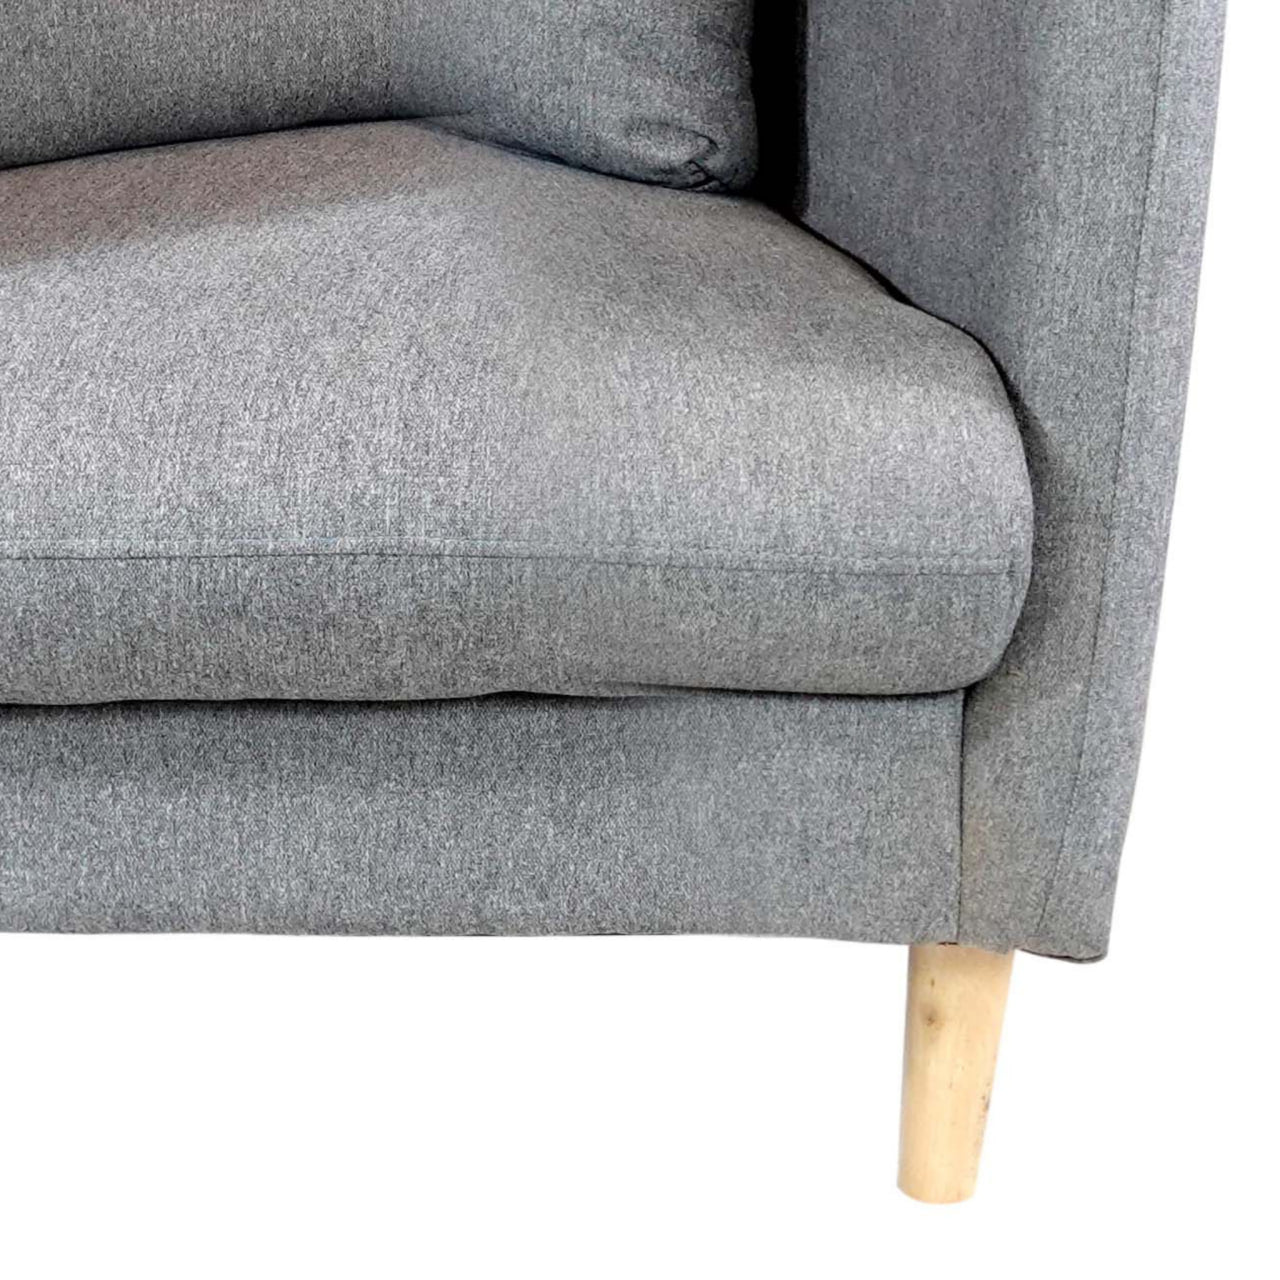 JANE 1-Seater Fabric Sofa AF Home